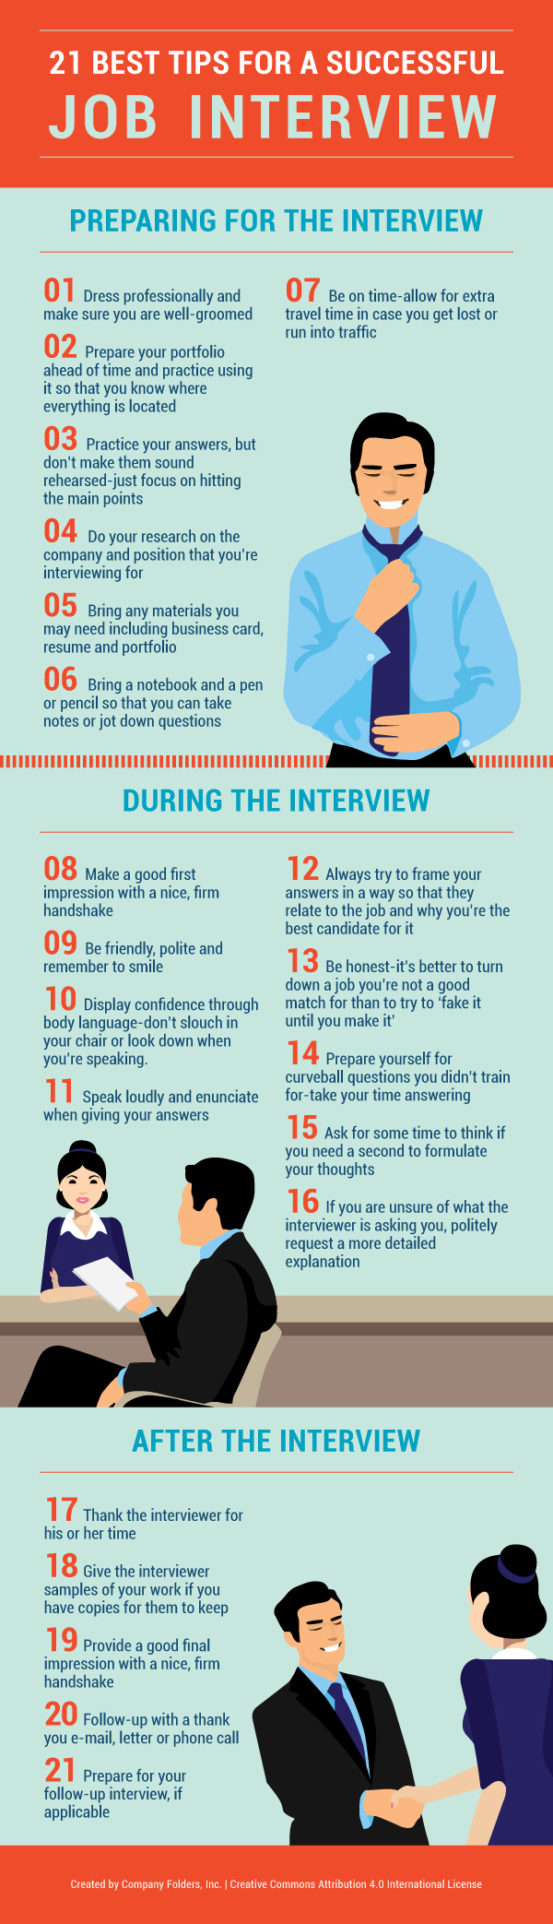 21 Best Interview Tips: Common Questions & Best Answers